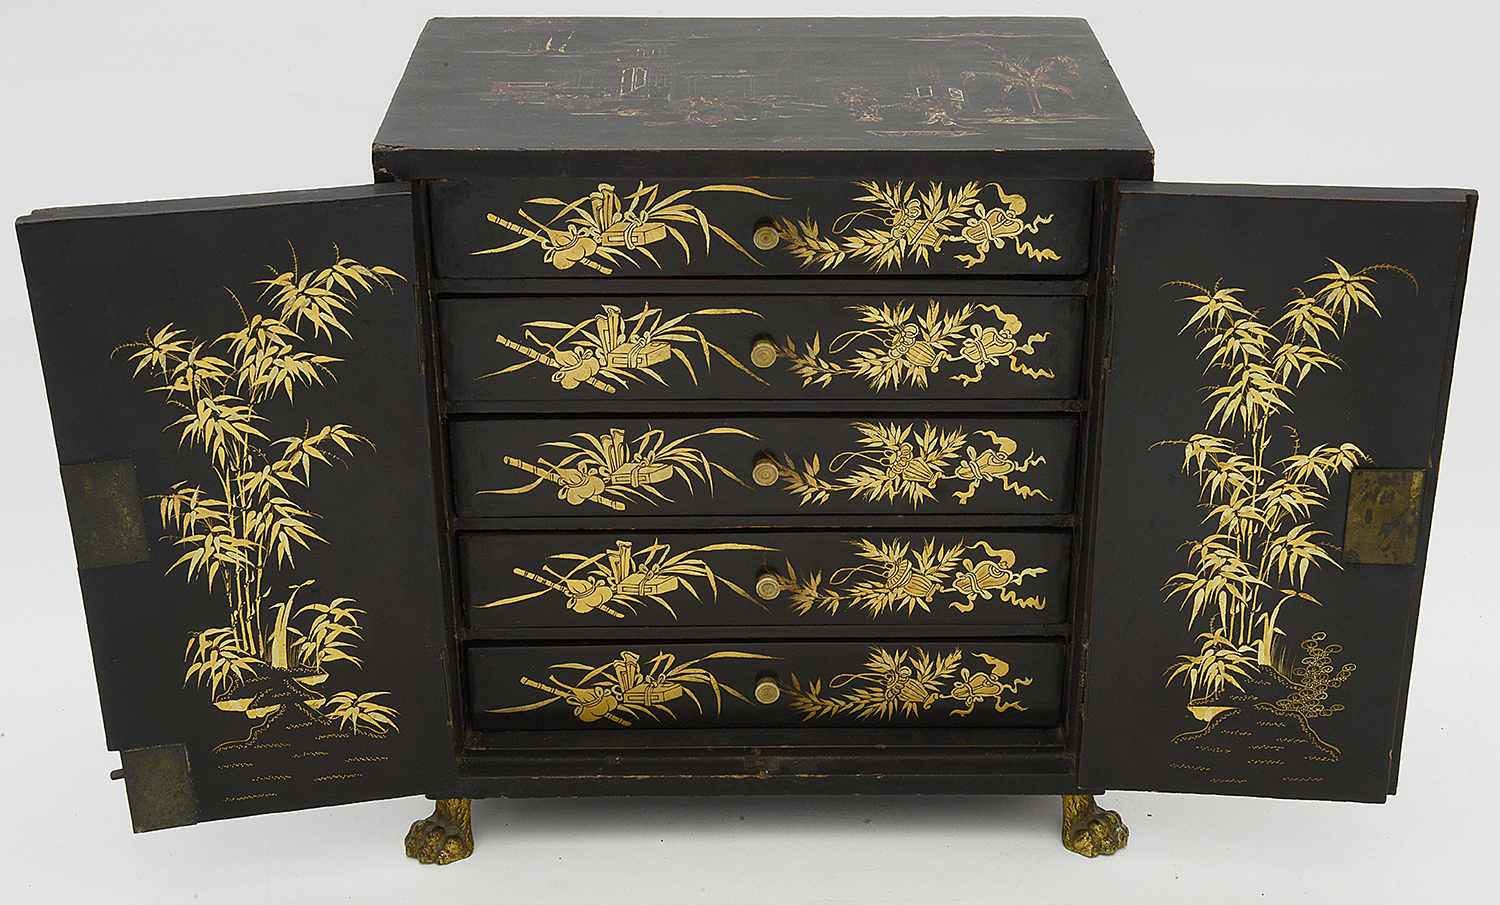 A mid 19th century Chinese export gilt decorated black lacquer table cabinet - Image 4 of 4